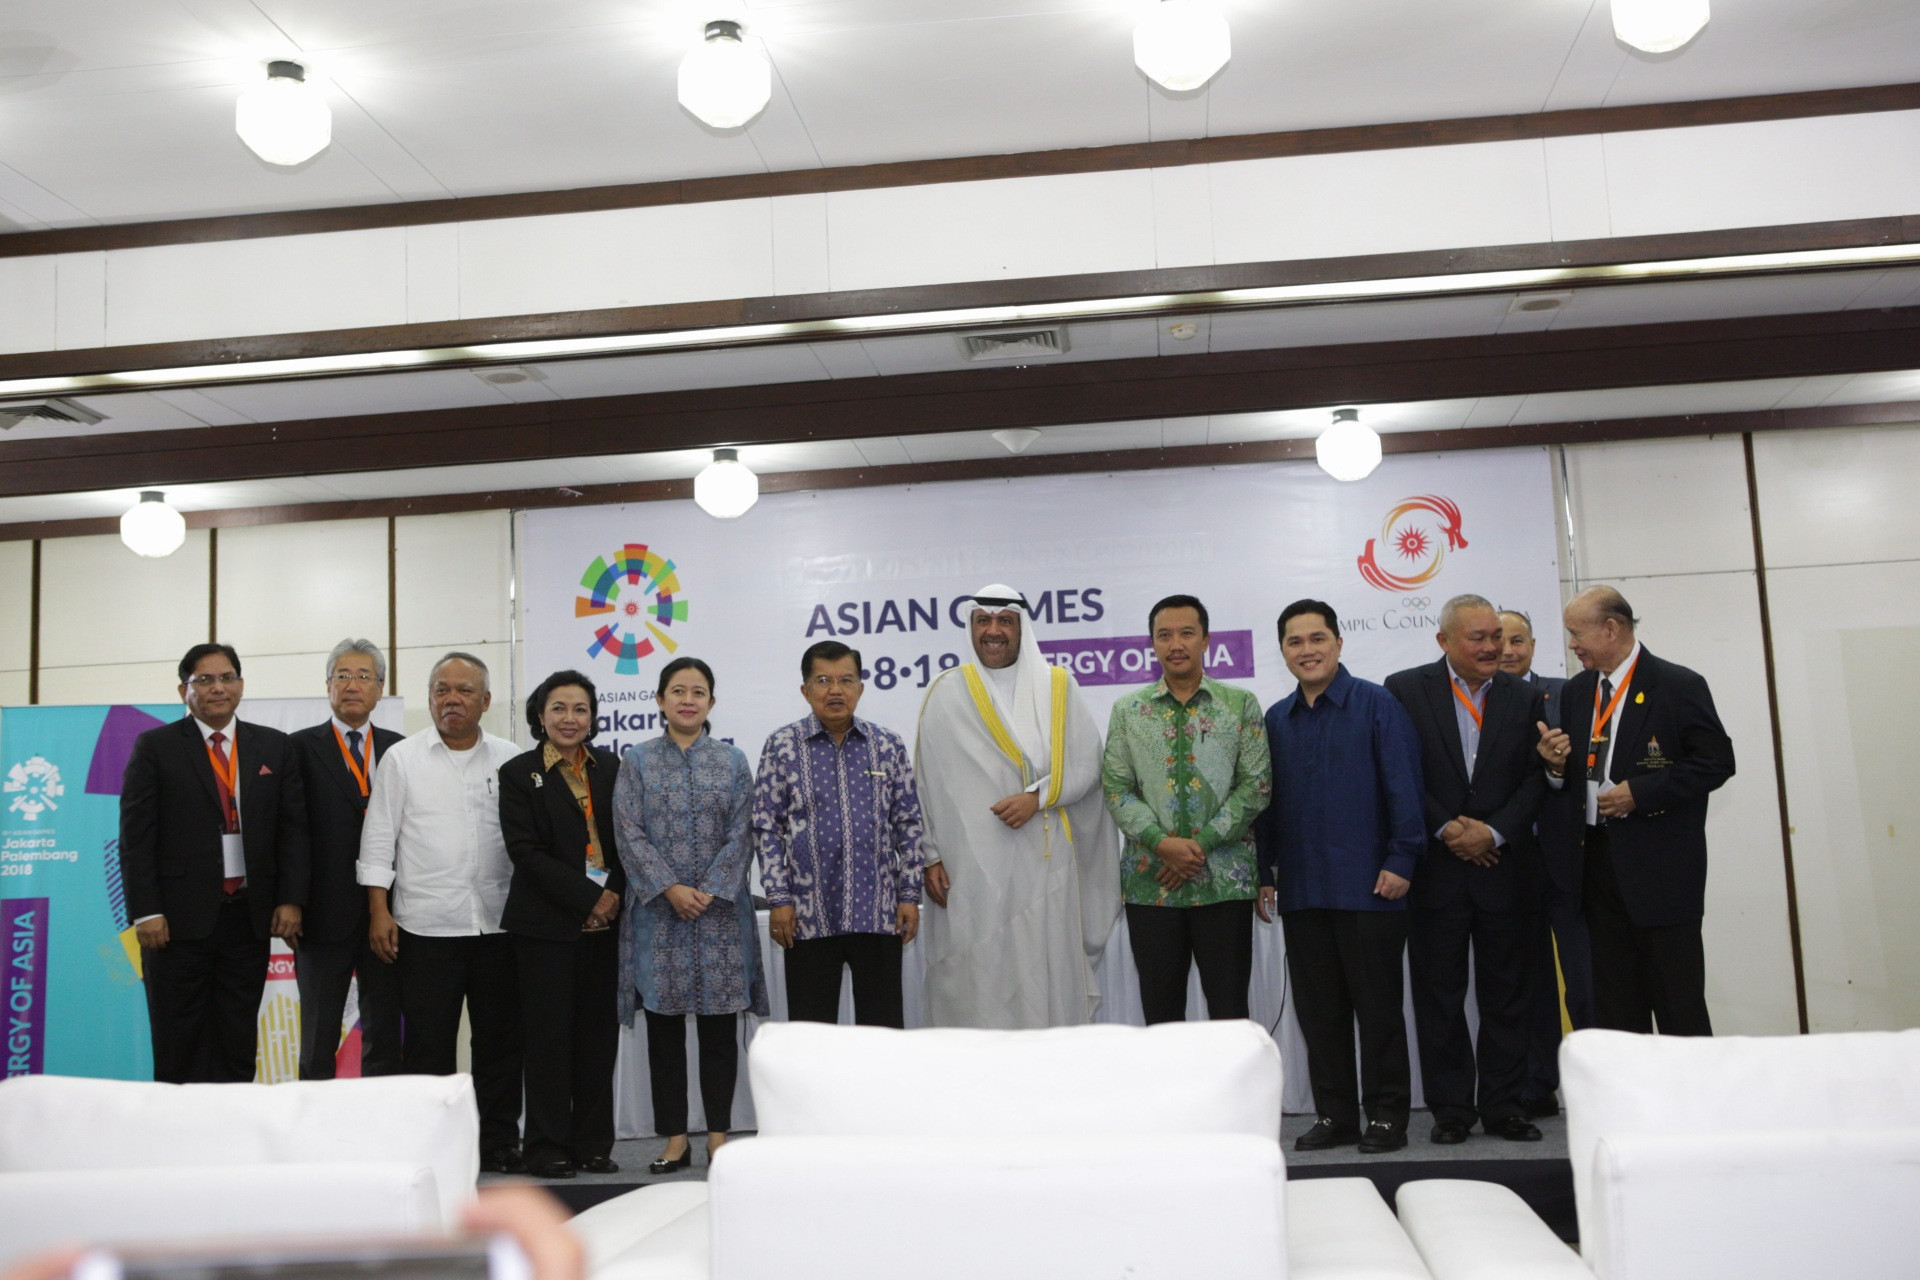 OCA and Jakarta 2018 sign marketing deal as three sponsors signed up for Asian Games